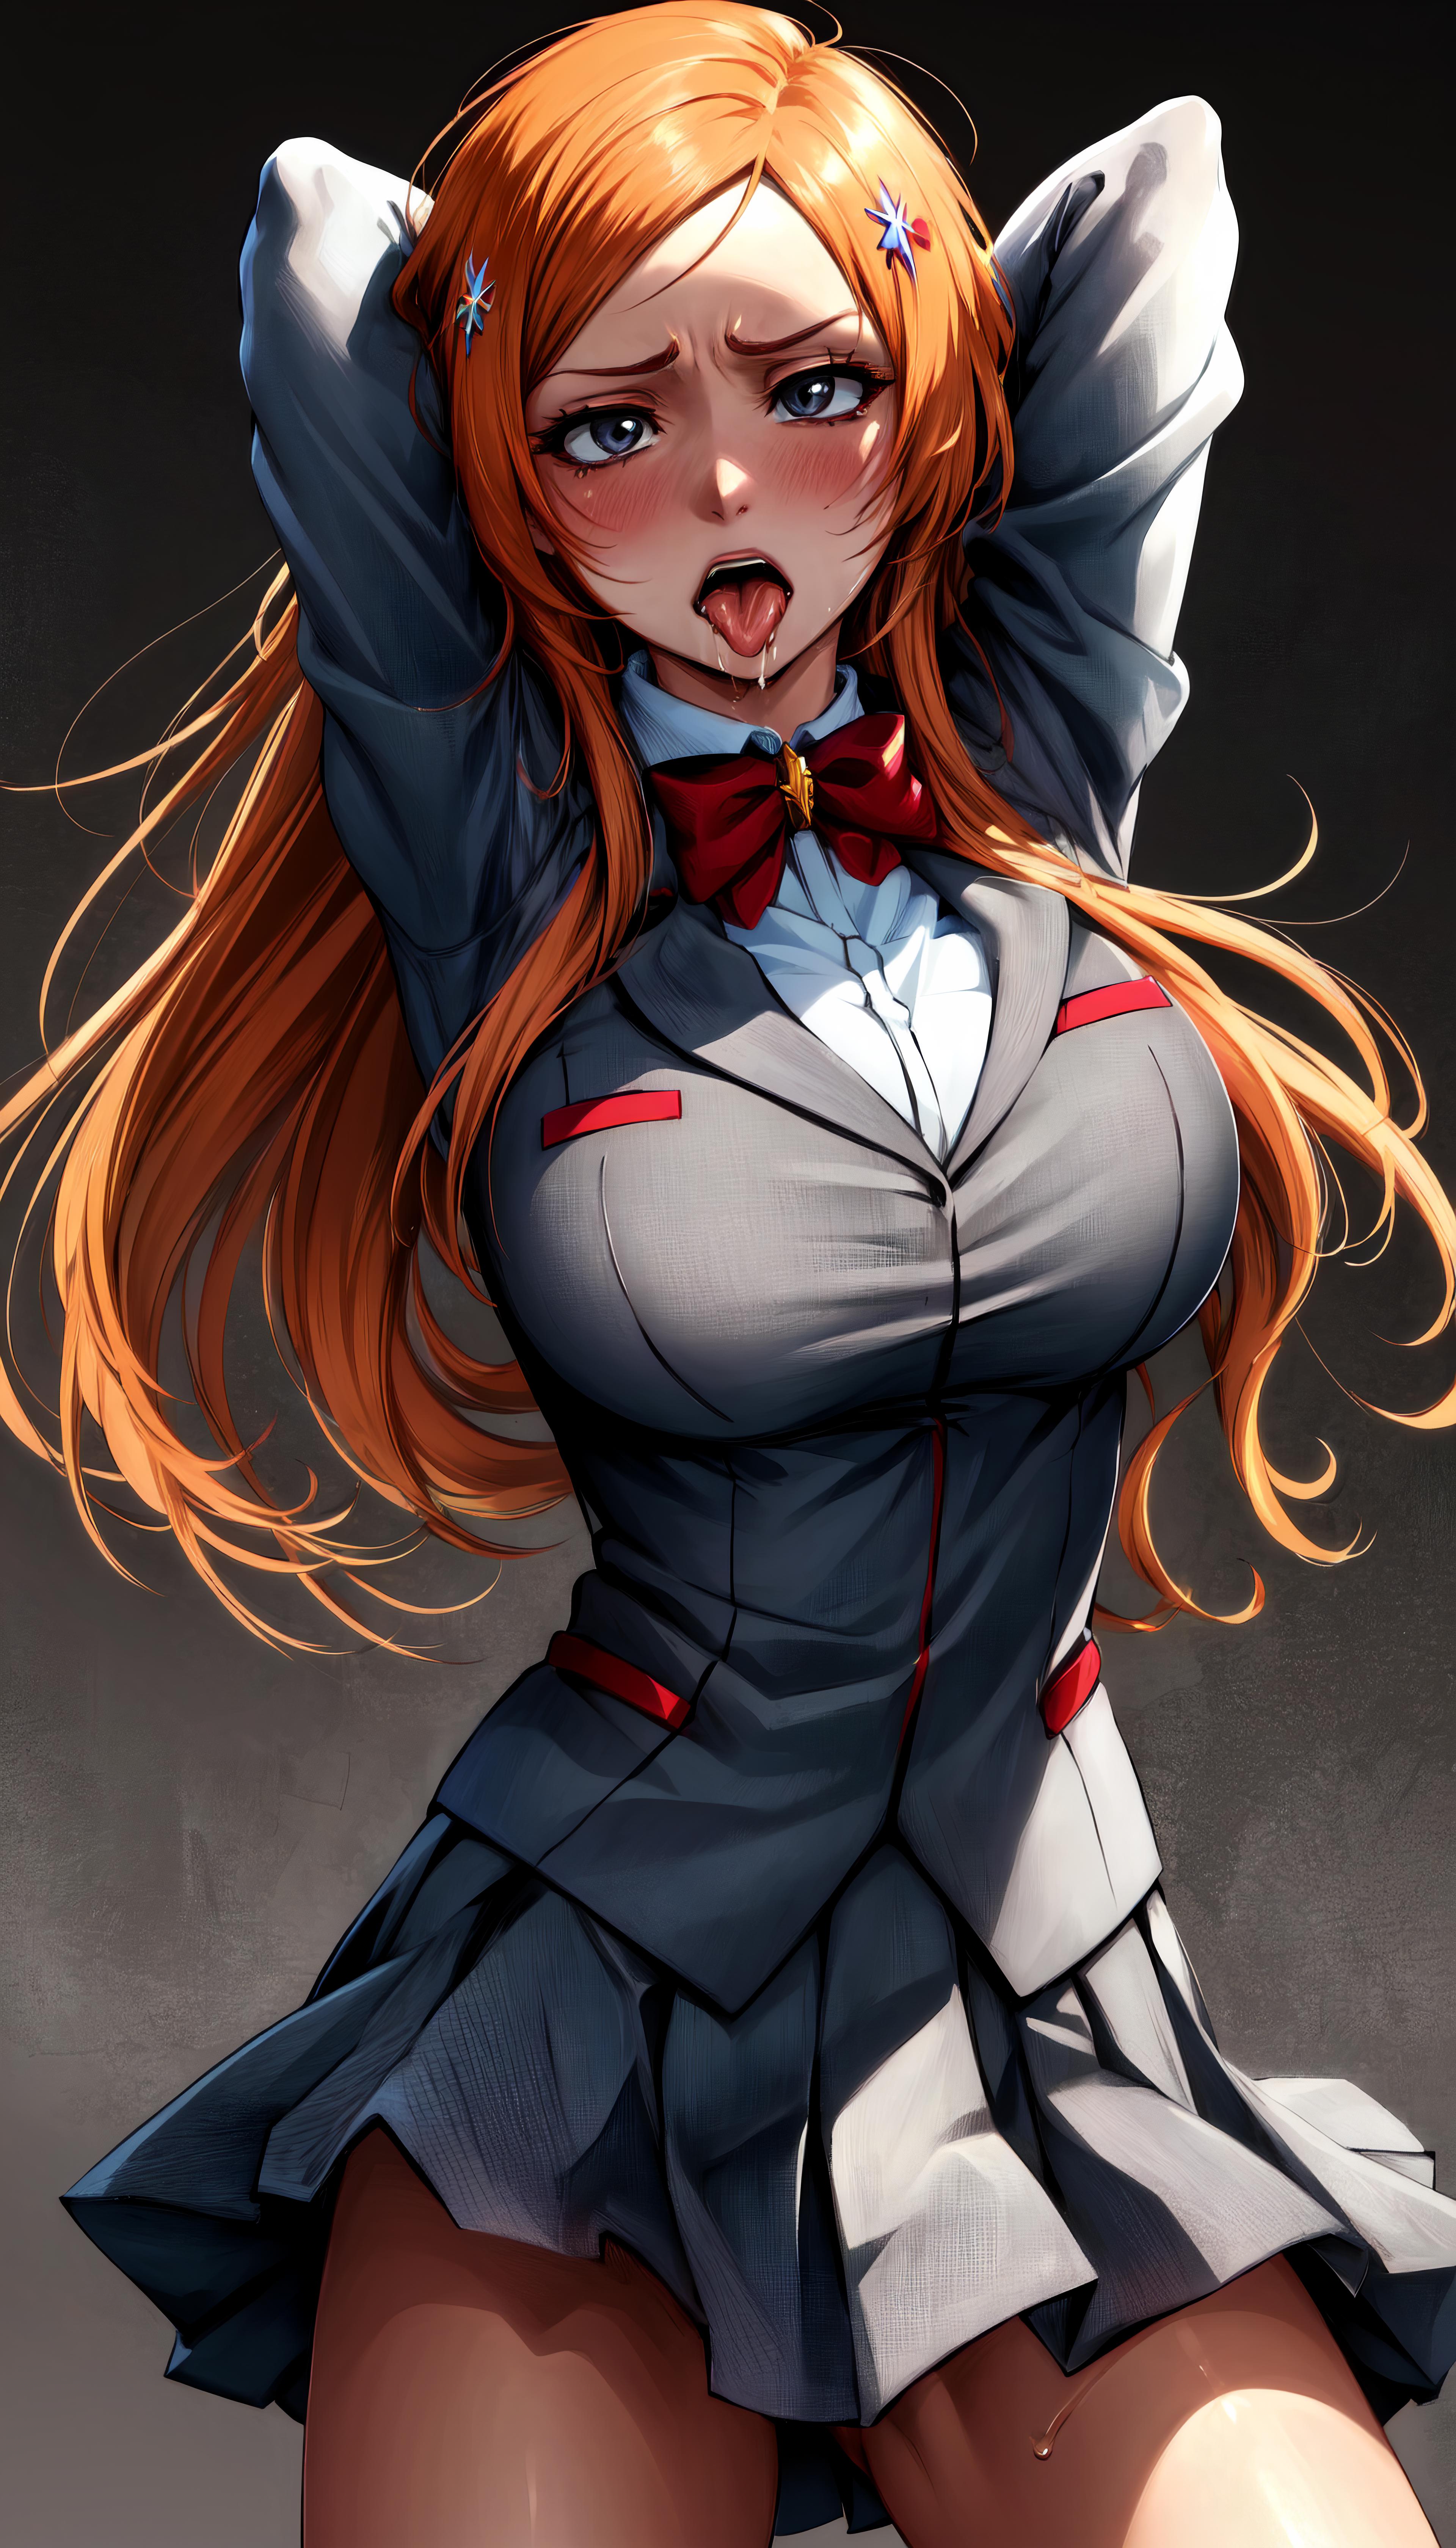 LoRA || Orihime Inoue (Bleach) 2 skins || image by Gwess